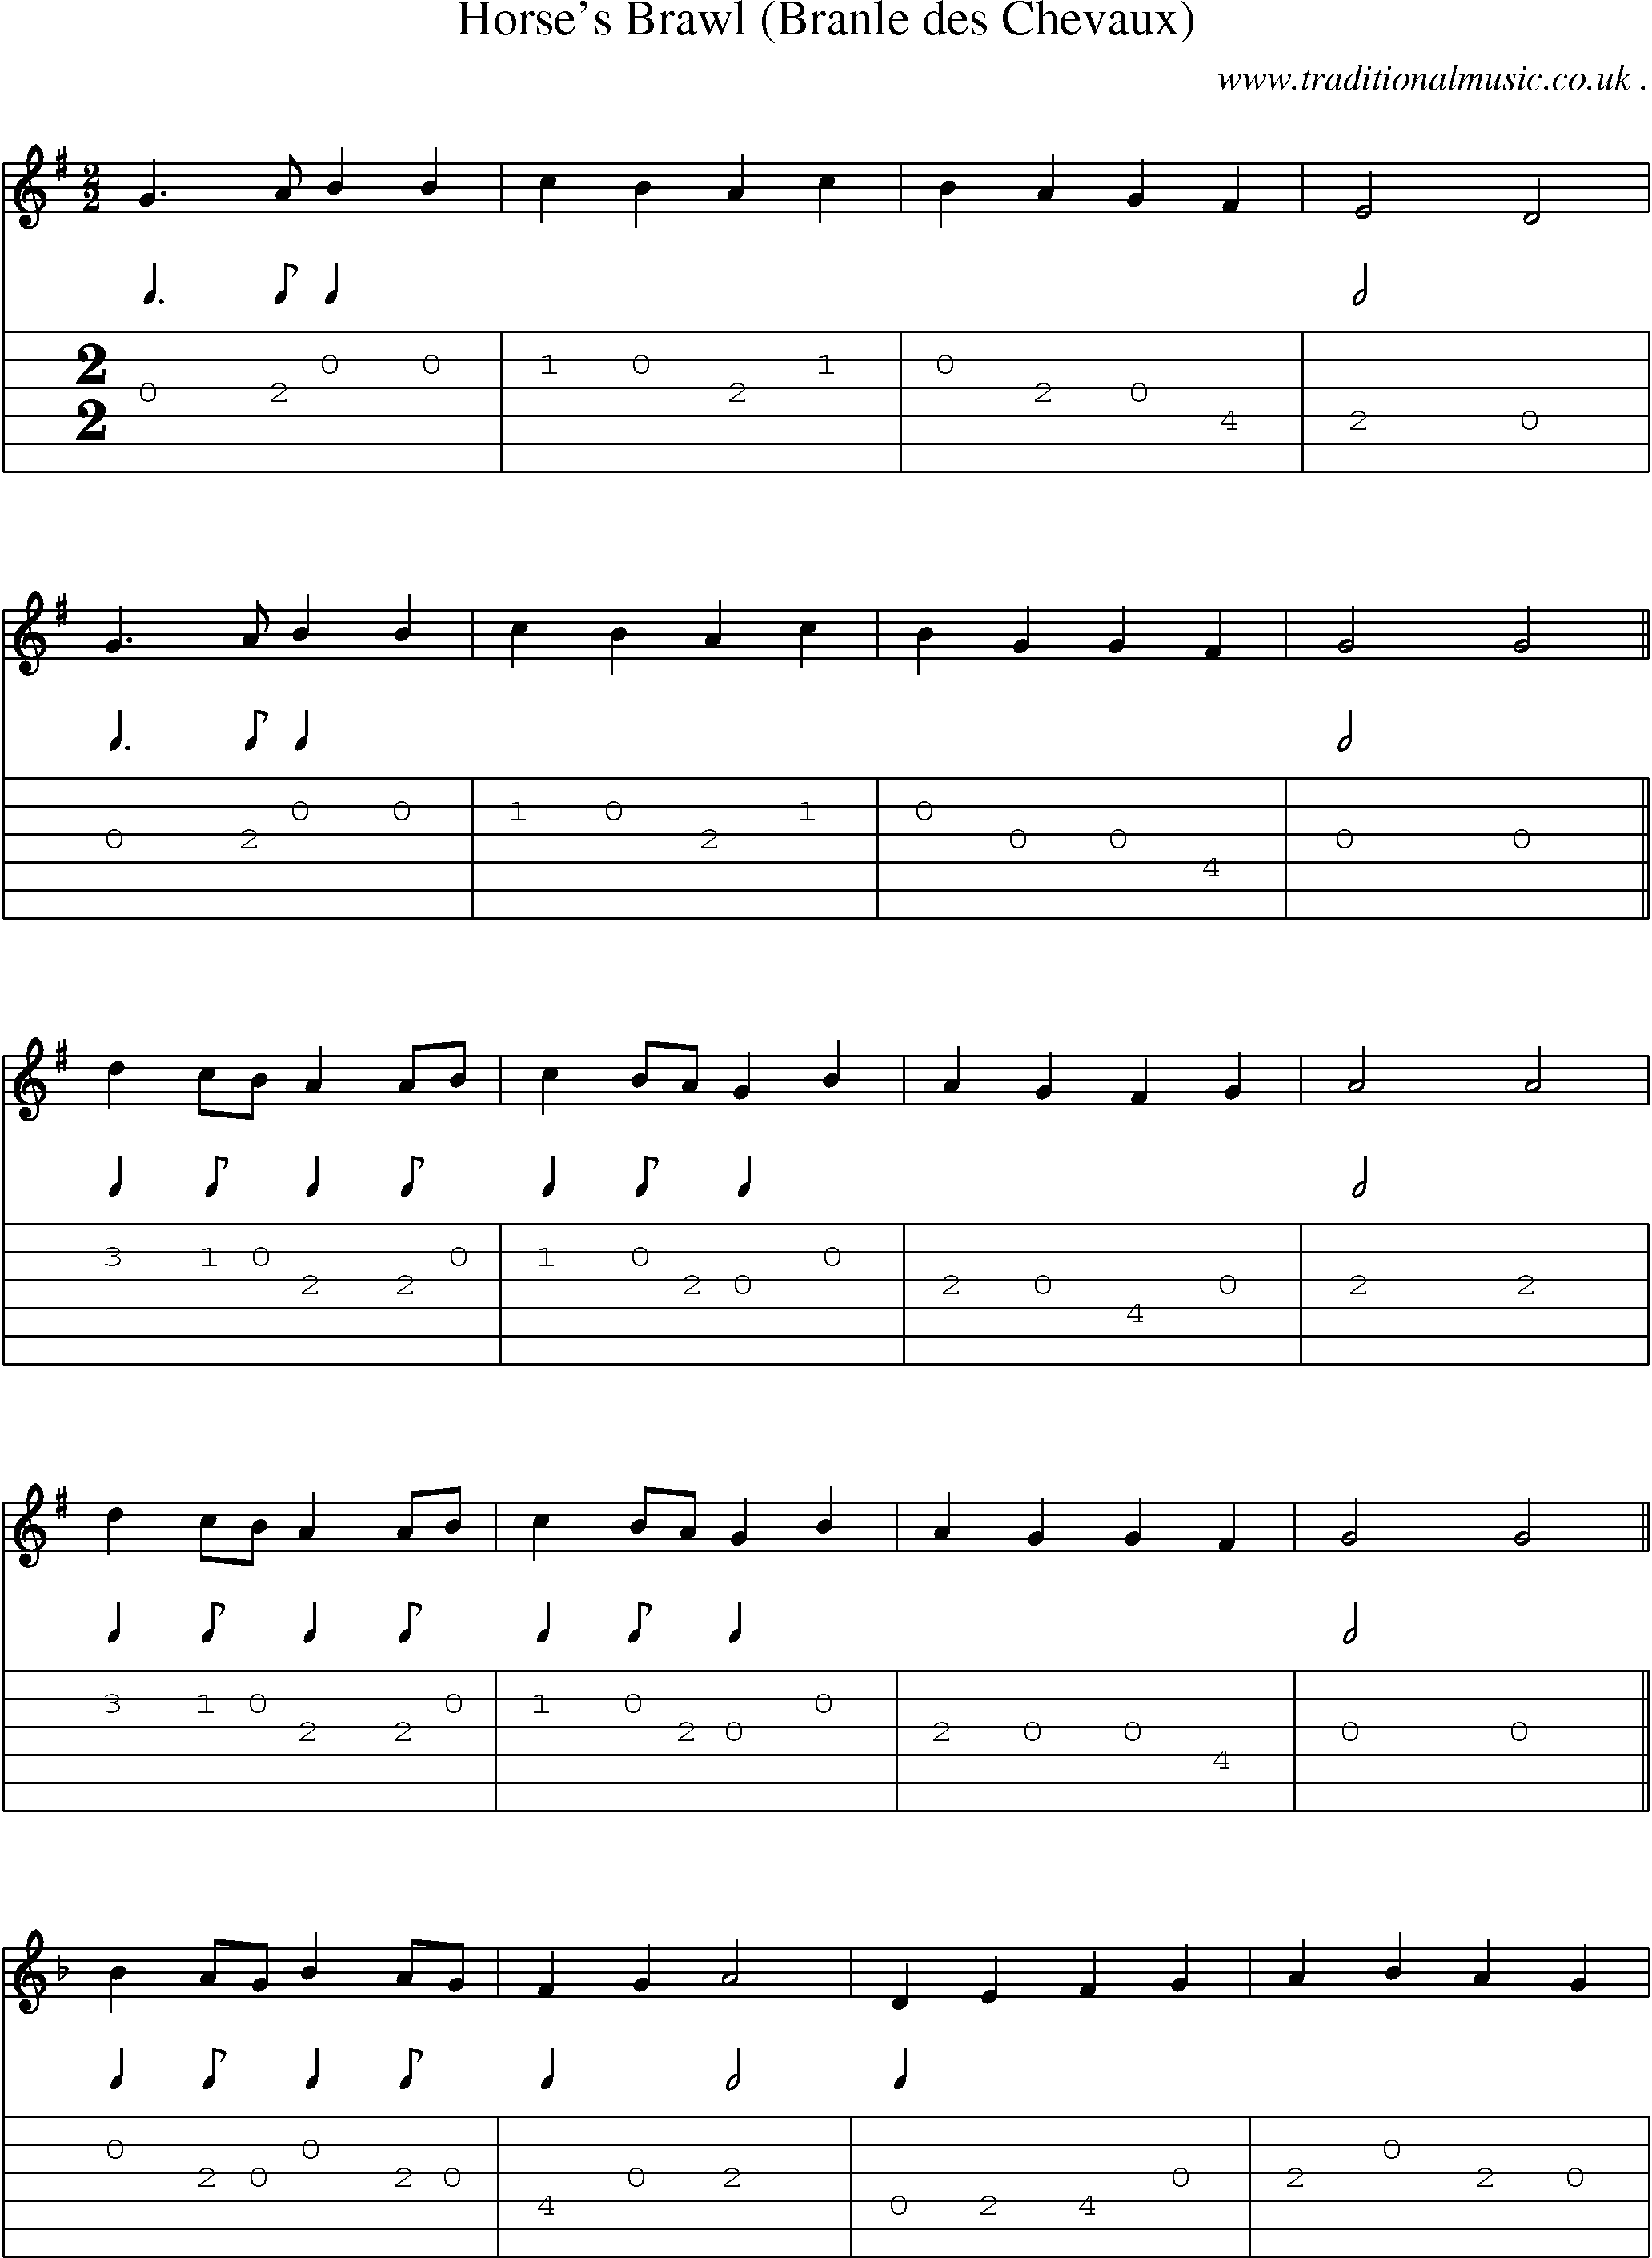 Sheet-Music and Guitar Tabs for Horses Brawl (branle Des Chevaux)